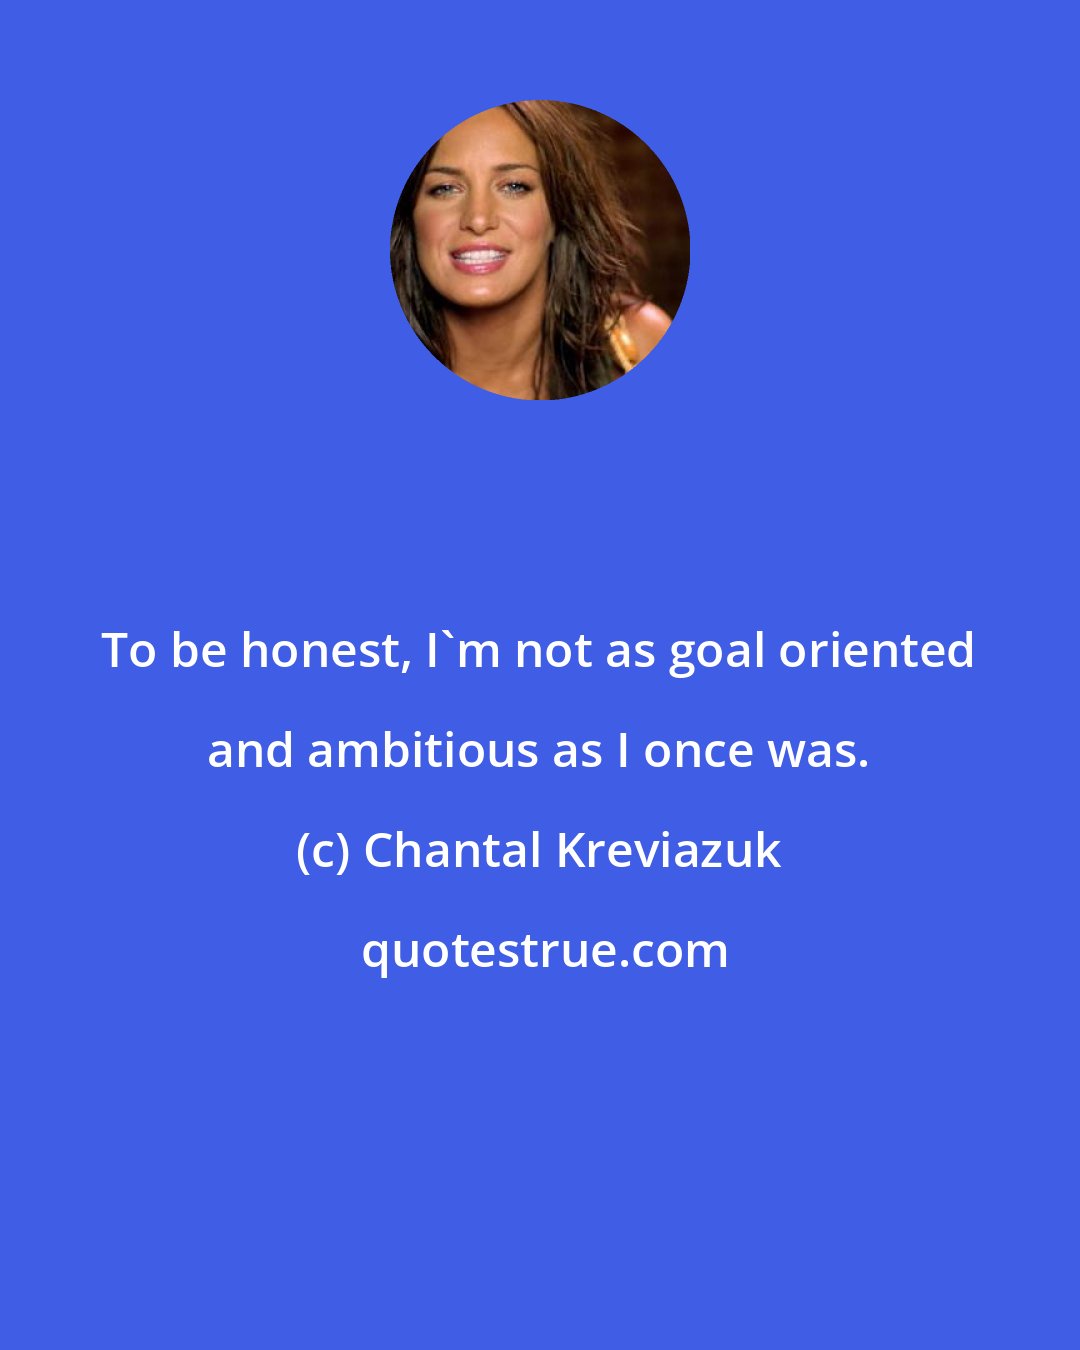 Chantal Kreviazuk: To be honest, I'm not as goal oriented and ambitious as I once was.